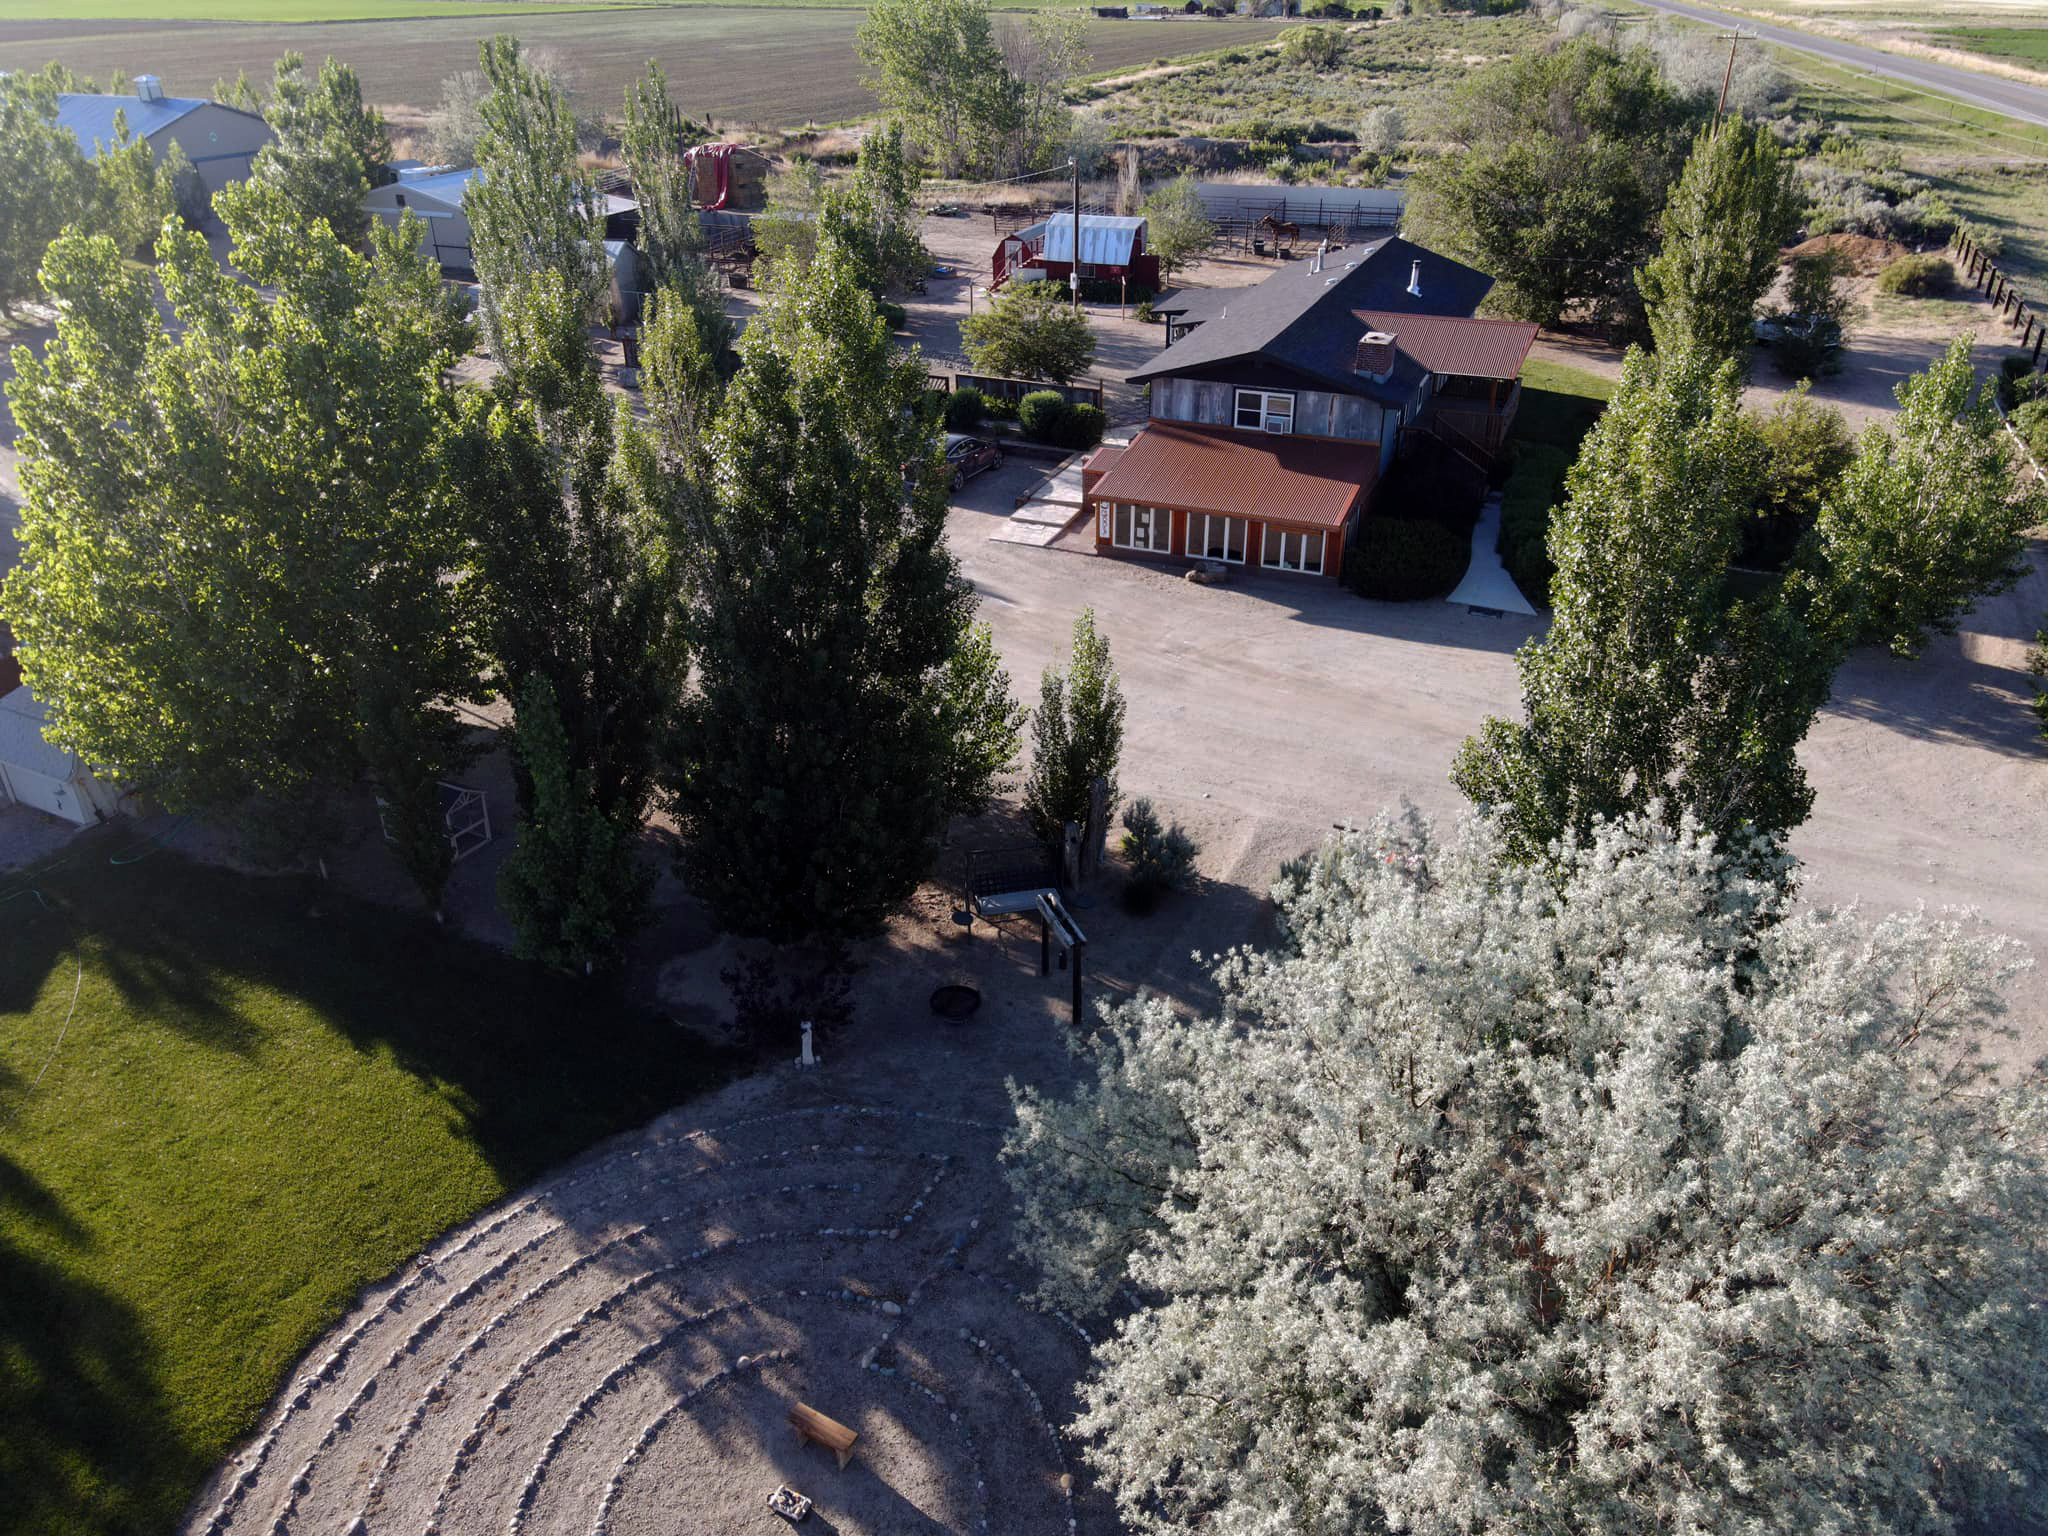 Photo of Serenity Wellness Retreat located in Basin, WY